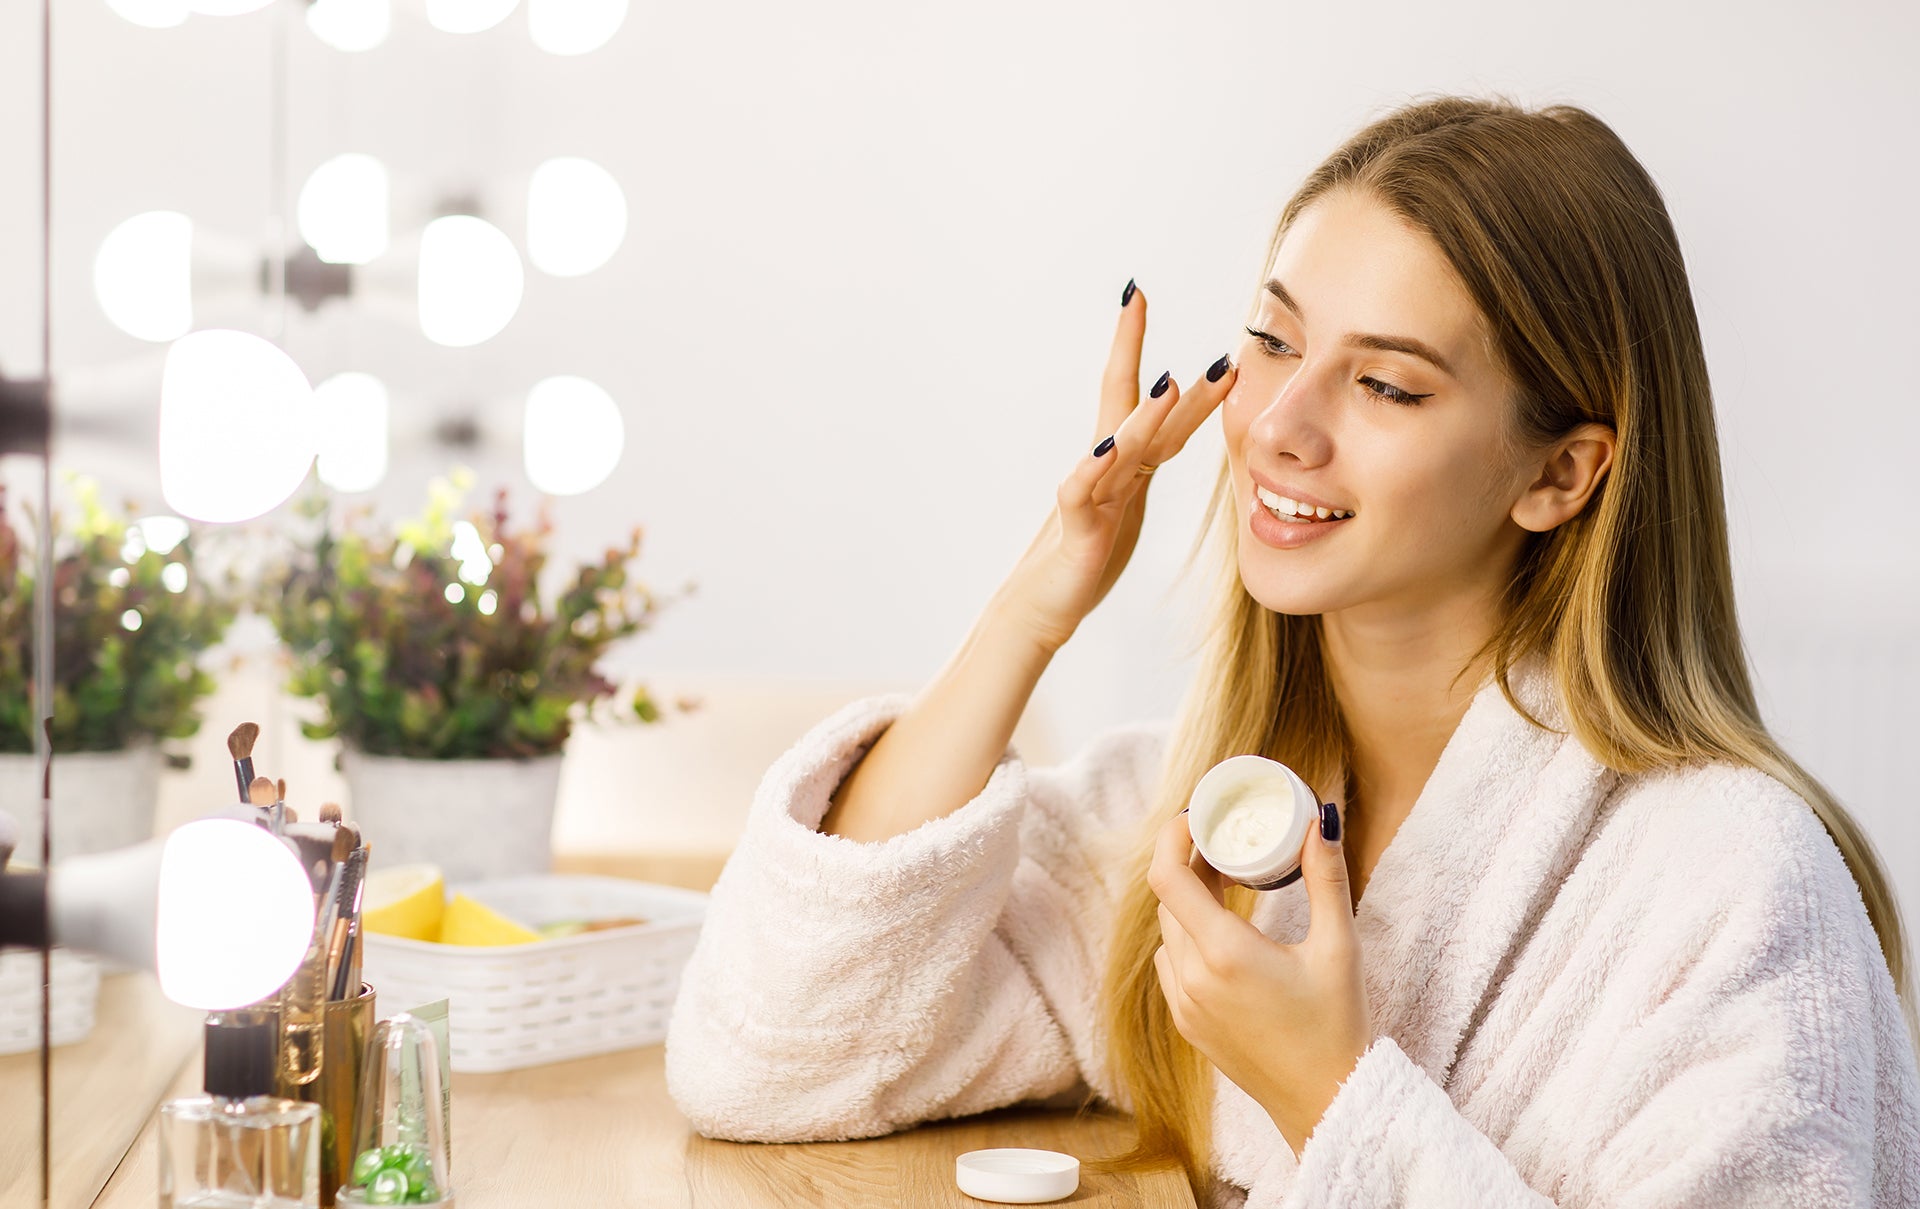 How To Choose Make-Up Products According To Your Skin Type?